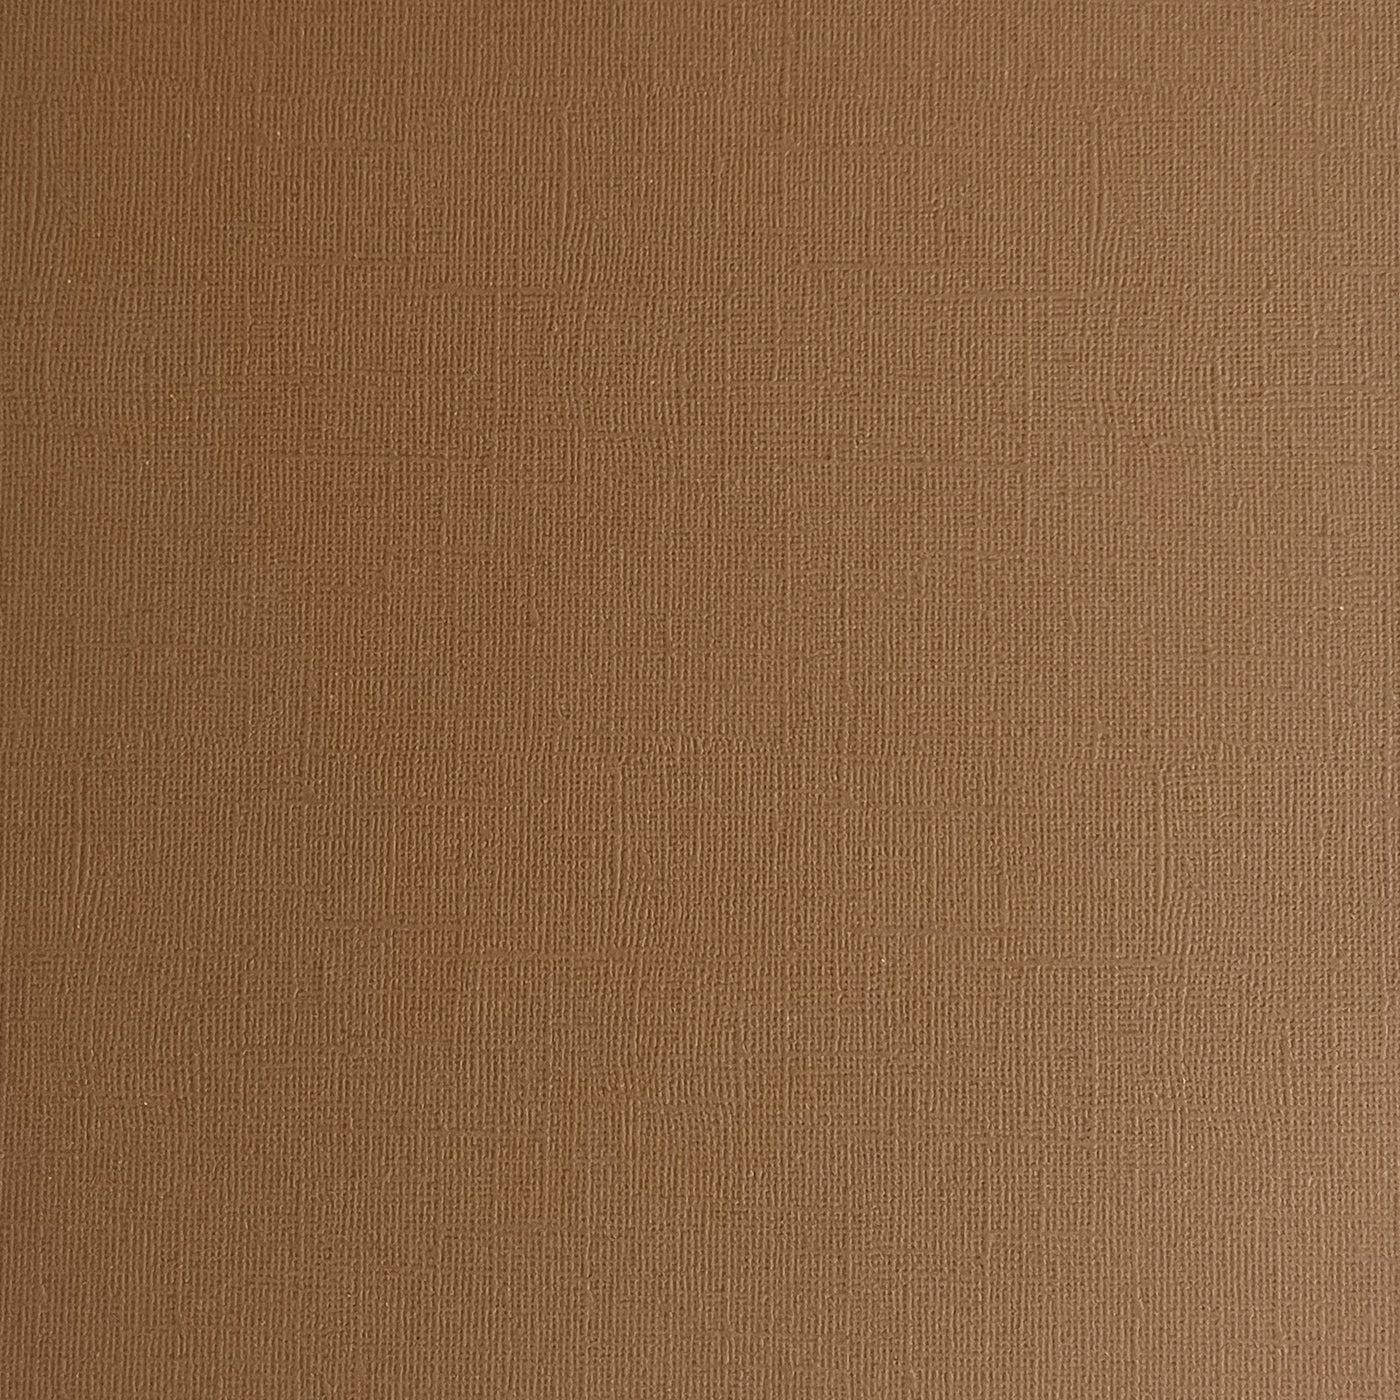 CATTAIL - Brown Textured 12x12 Cardstock - Encore Paper